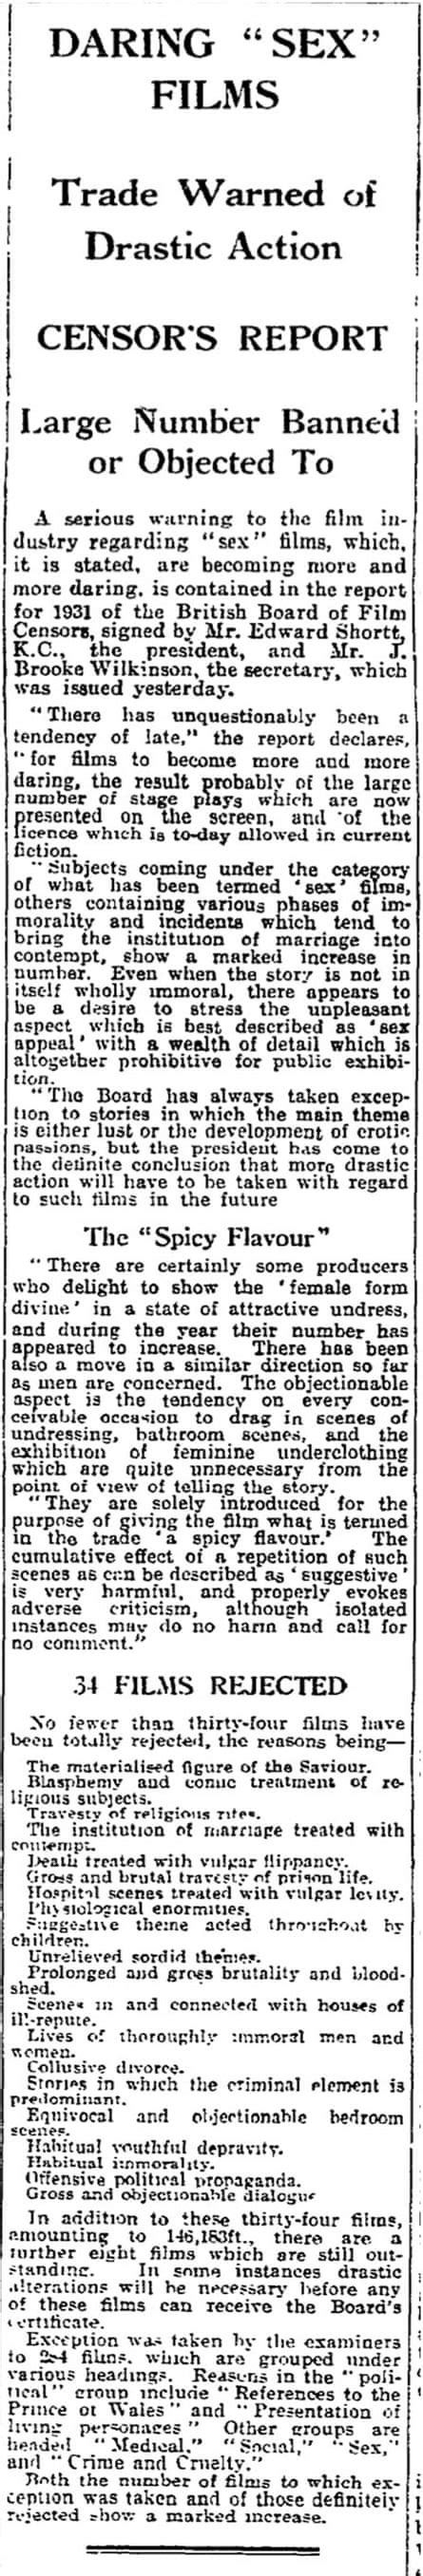 17 february 1932 censors warn of drastic action on daring sex films newspapers the guardian